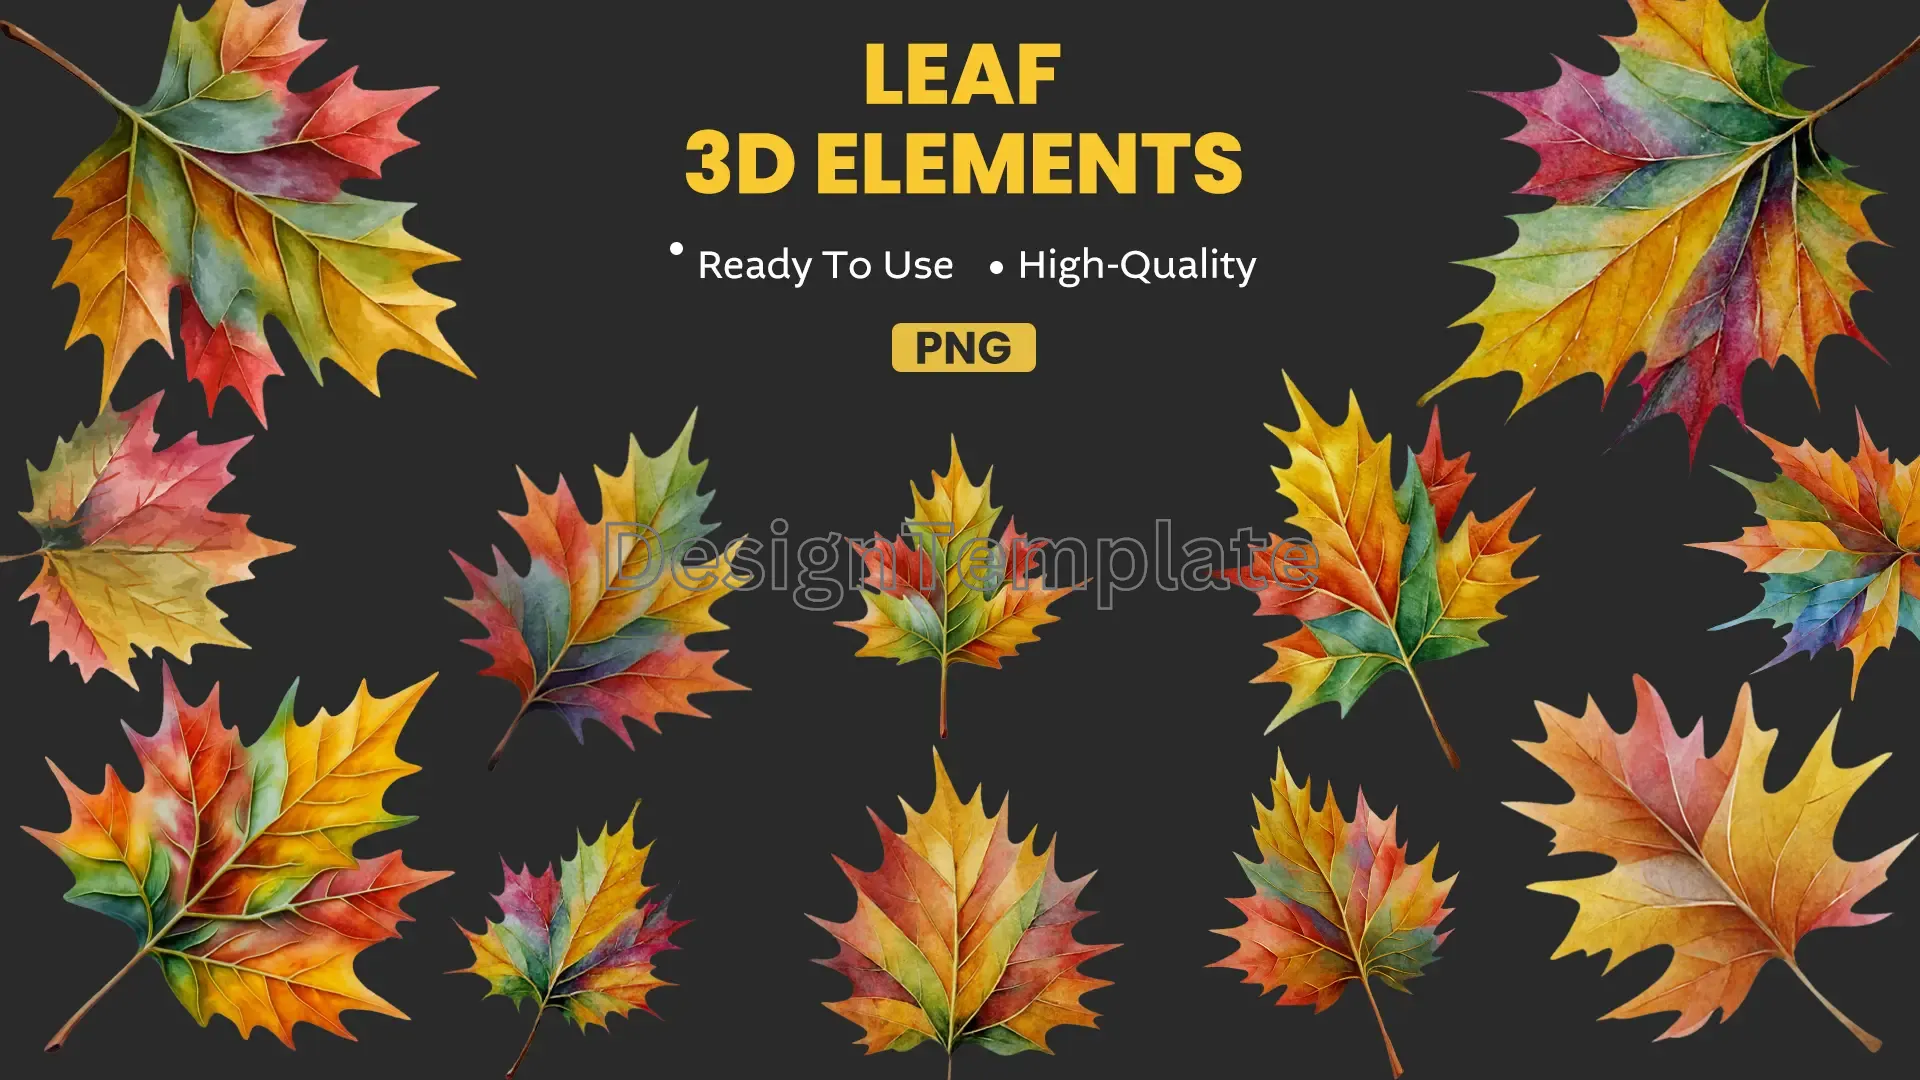 Colorful Leaves 3D Elements Pack